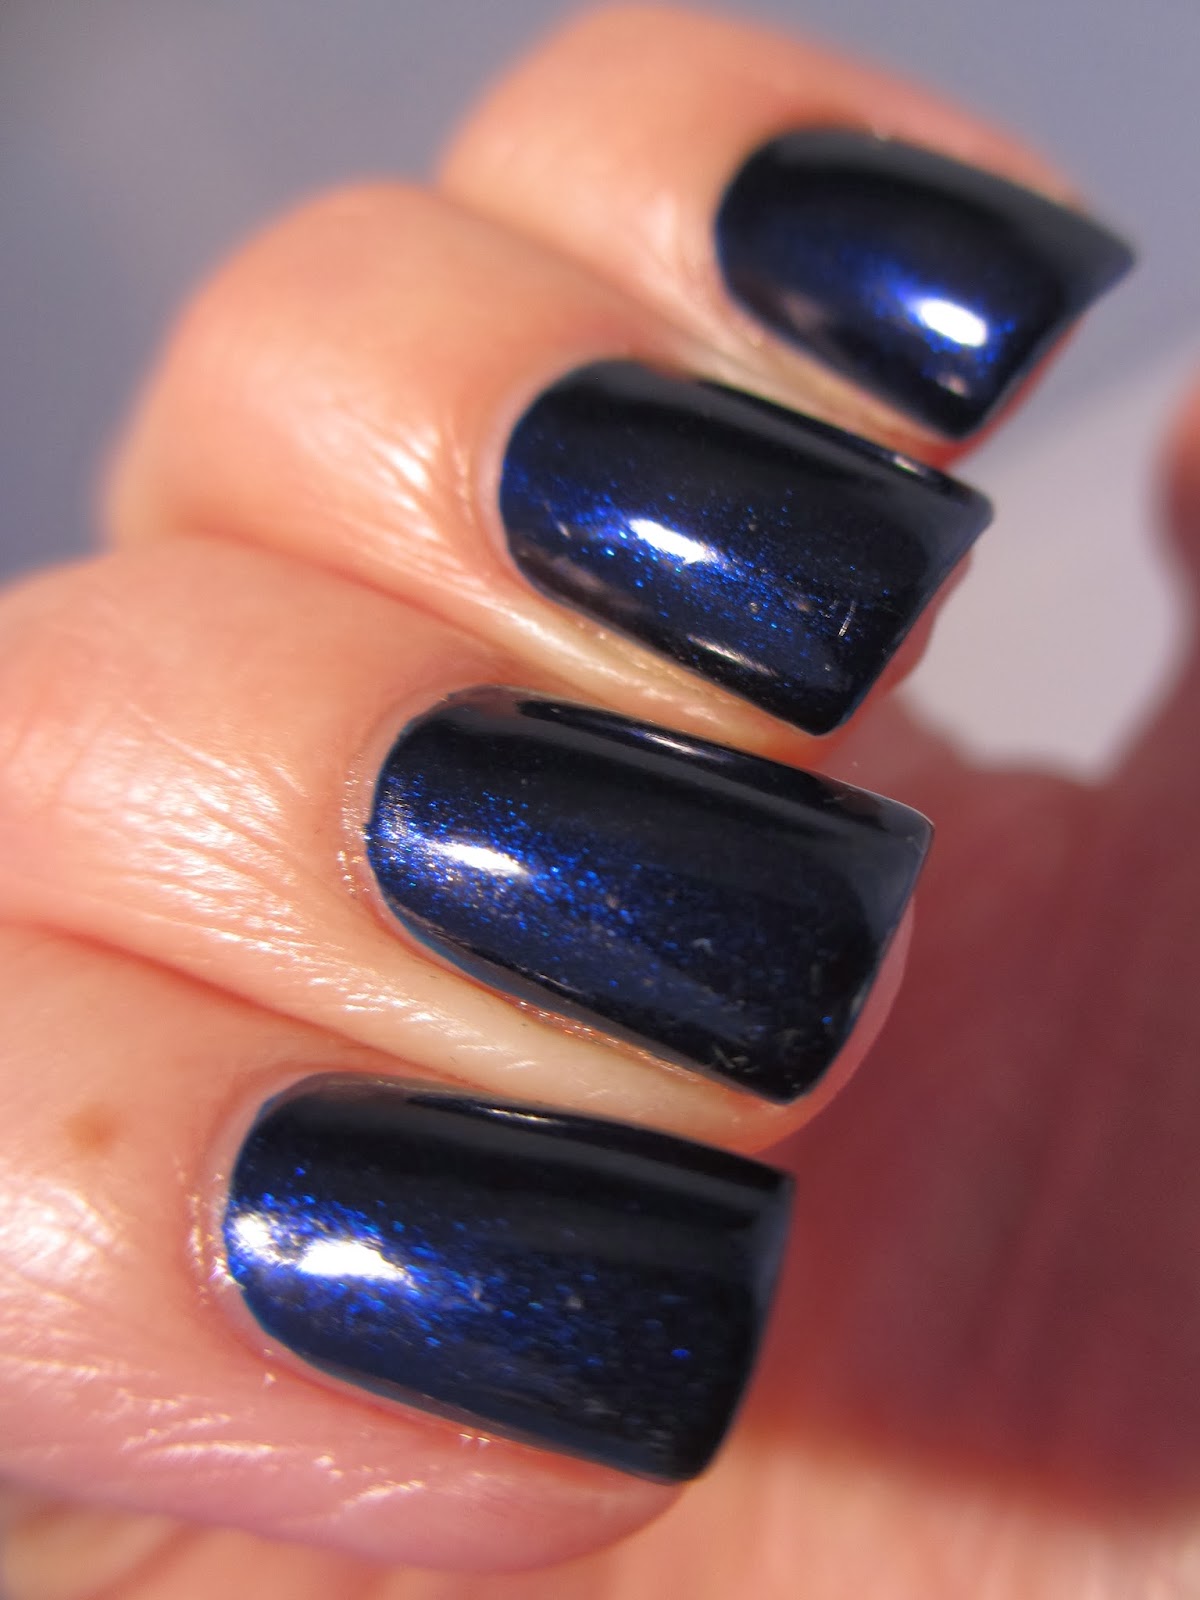 Orly-In-The-Navy-swatch-blue-nail-polish